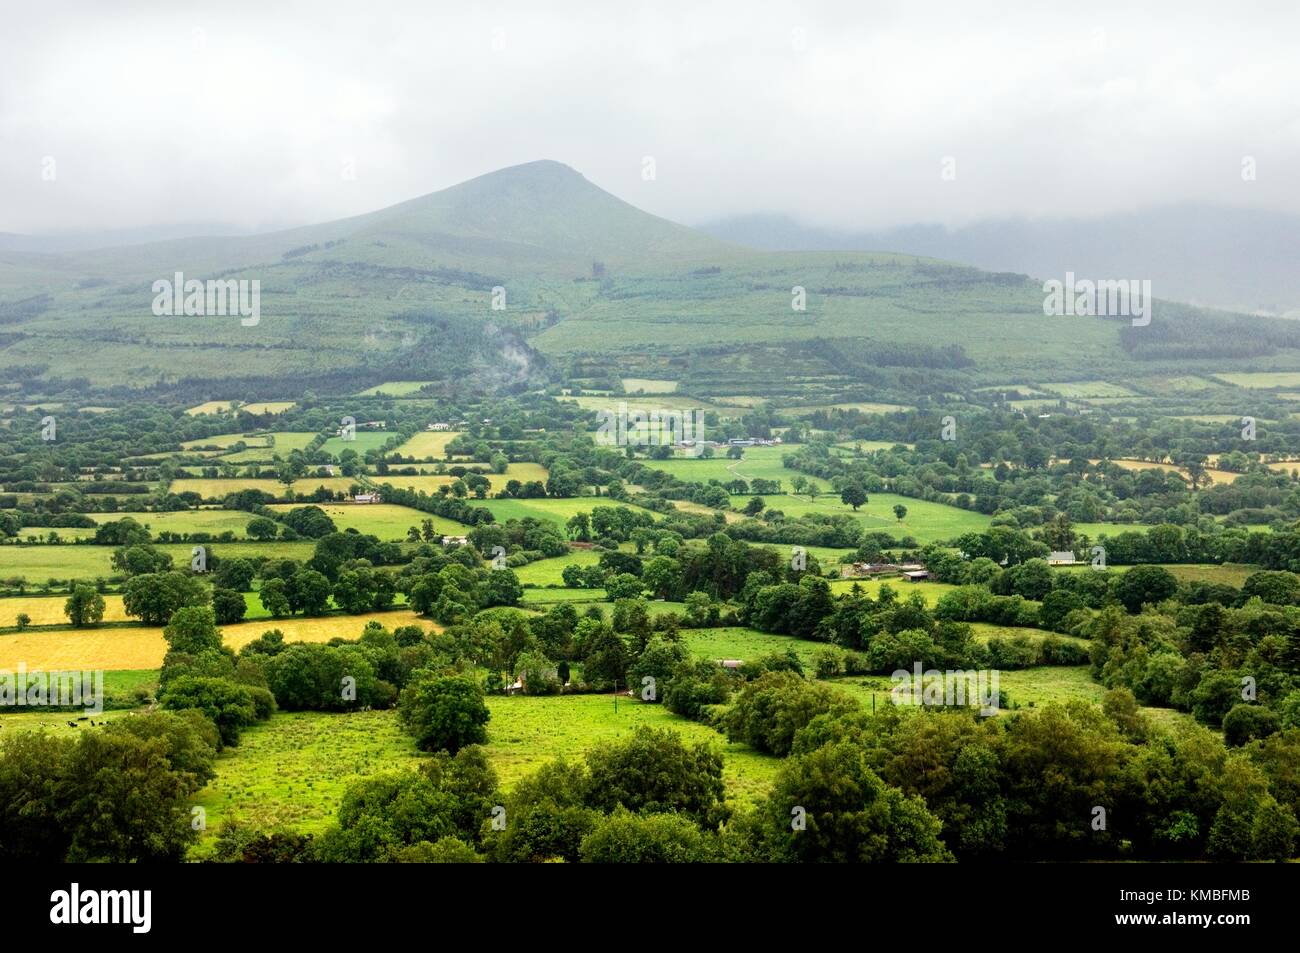 A ‘soft’ day in County Tipperary. South across lush green field farmland of the Glen of Aherlow to the Galtee Mountains. Ireland Stock Photo